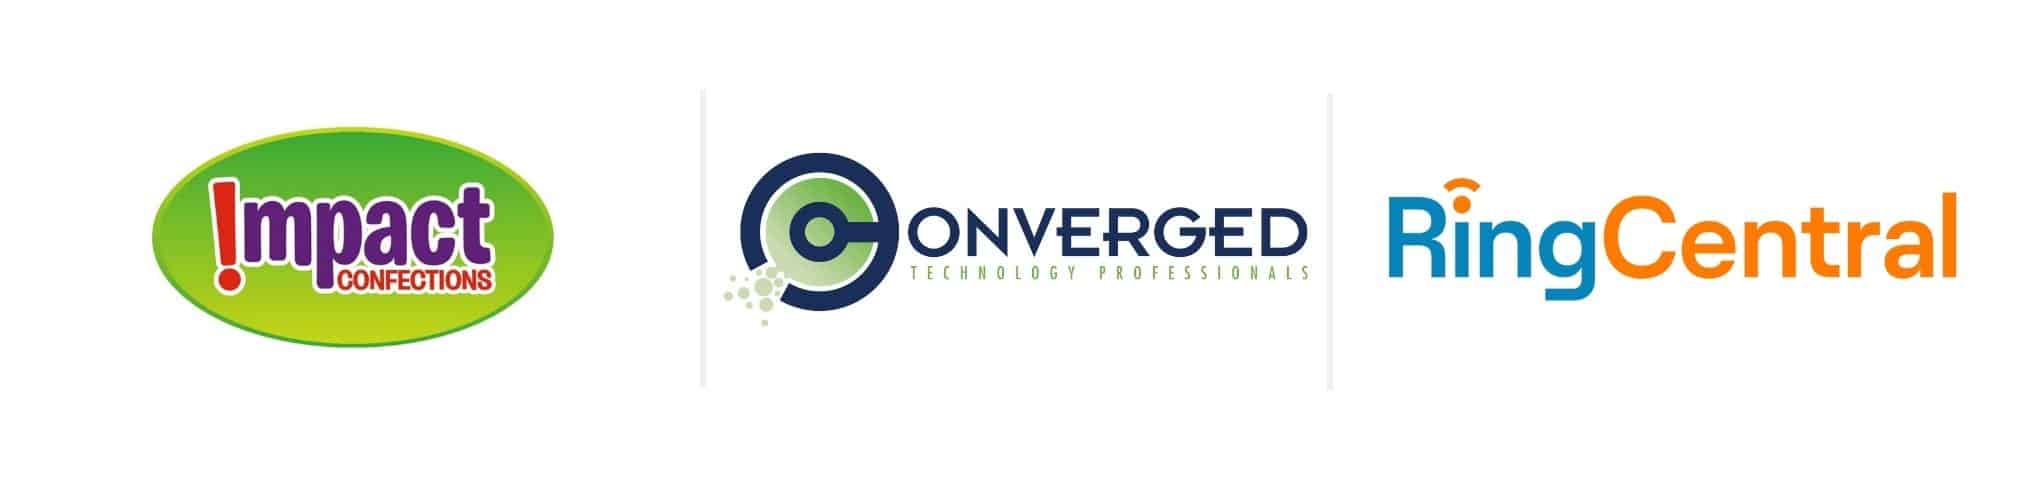 Impact Confections | Converged Technology Professionals | RingCentral